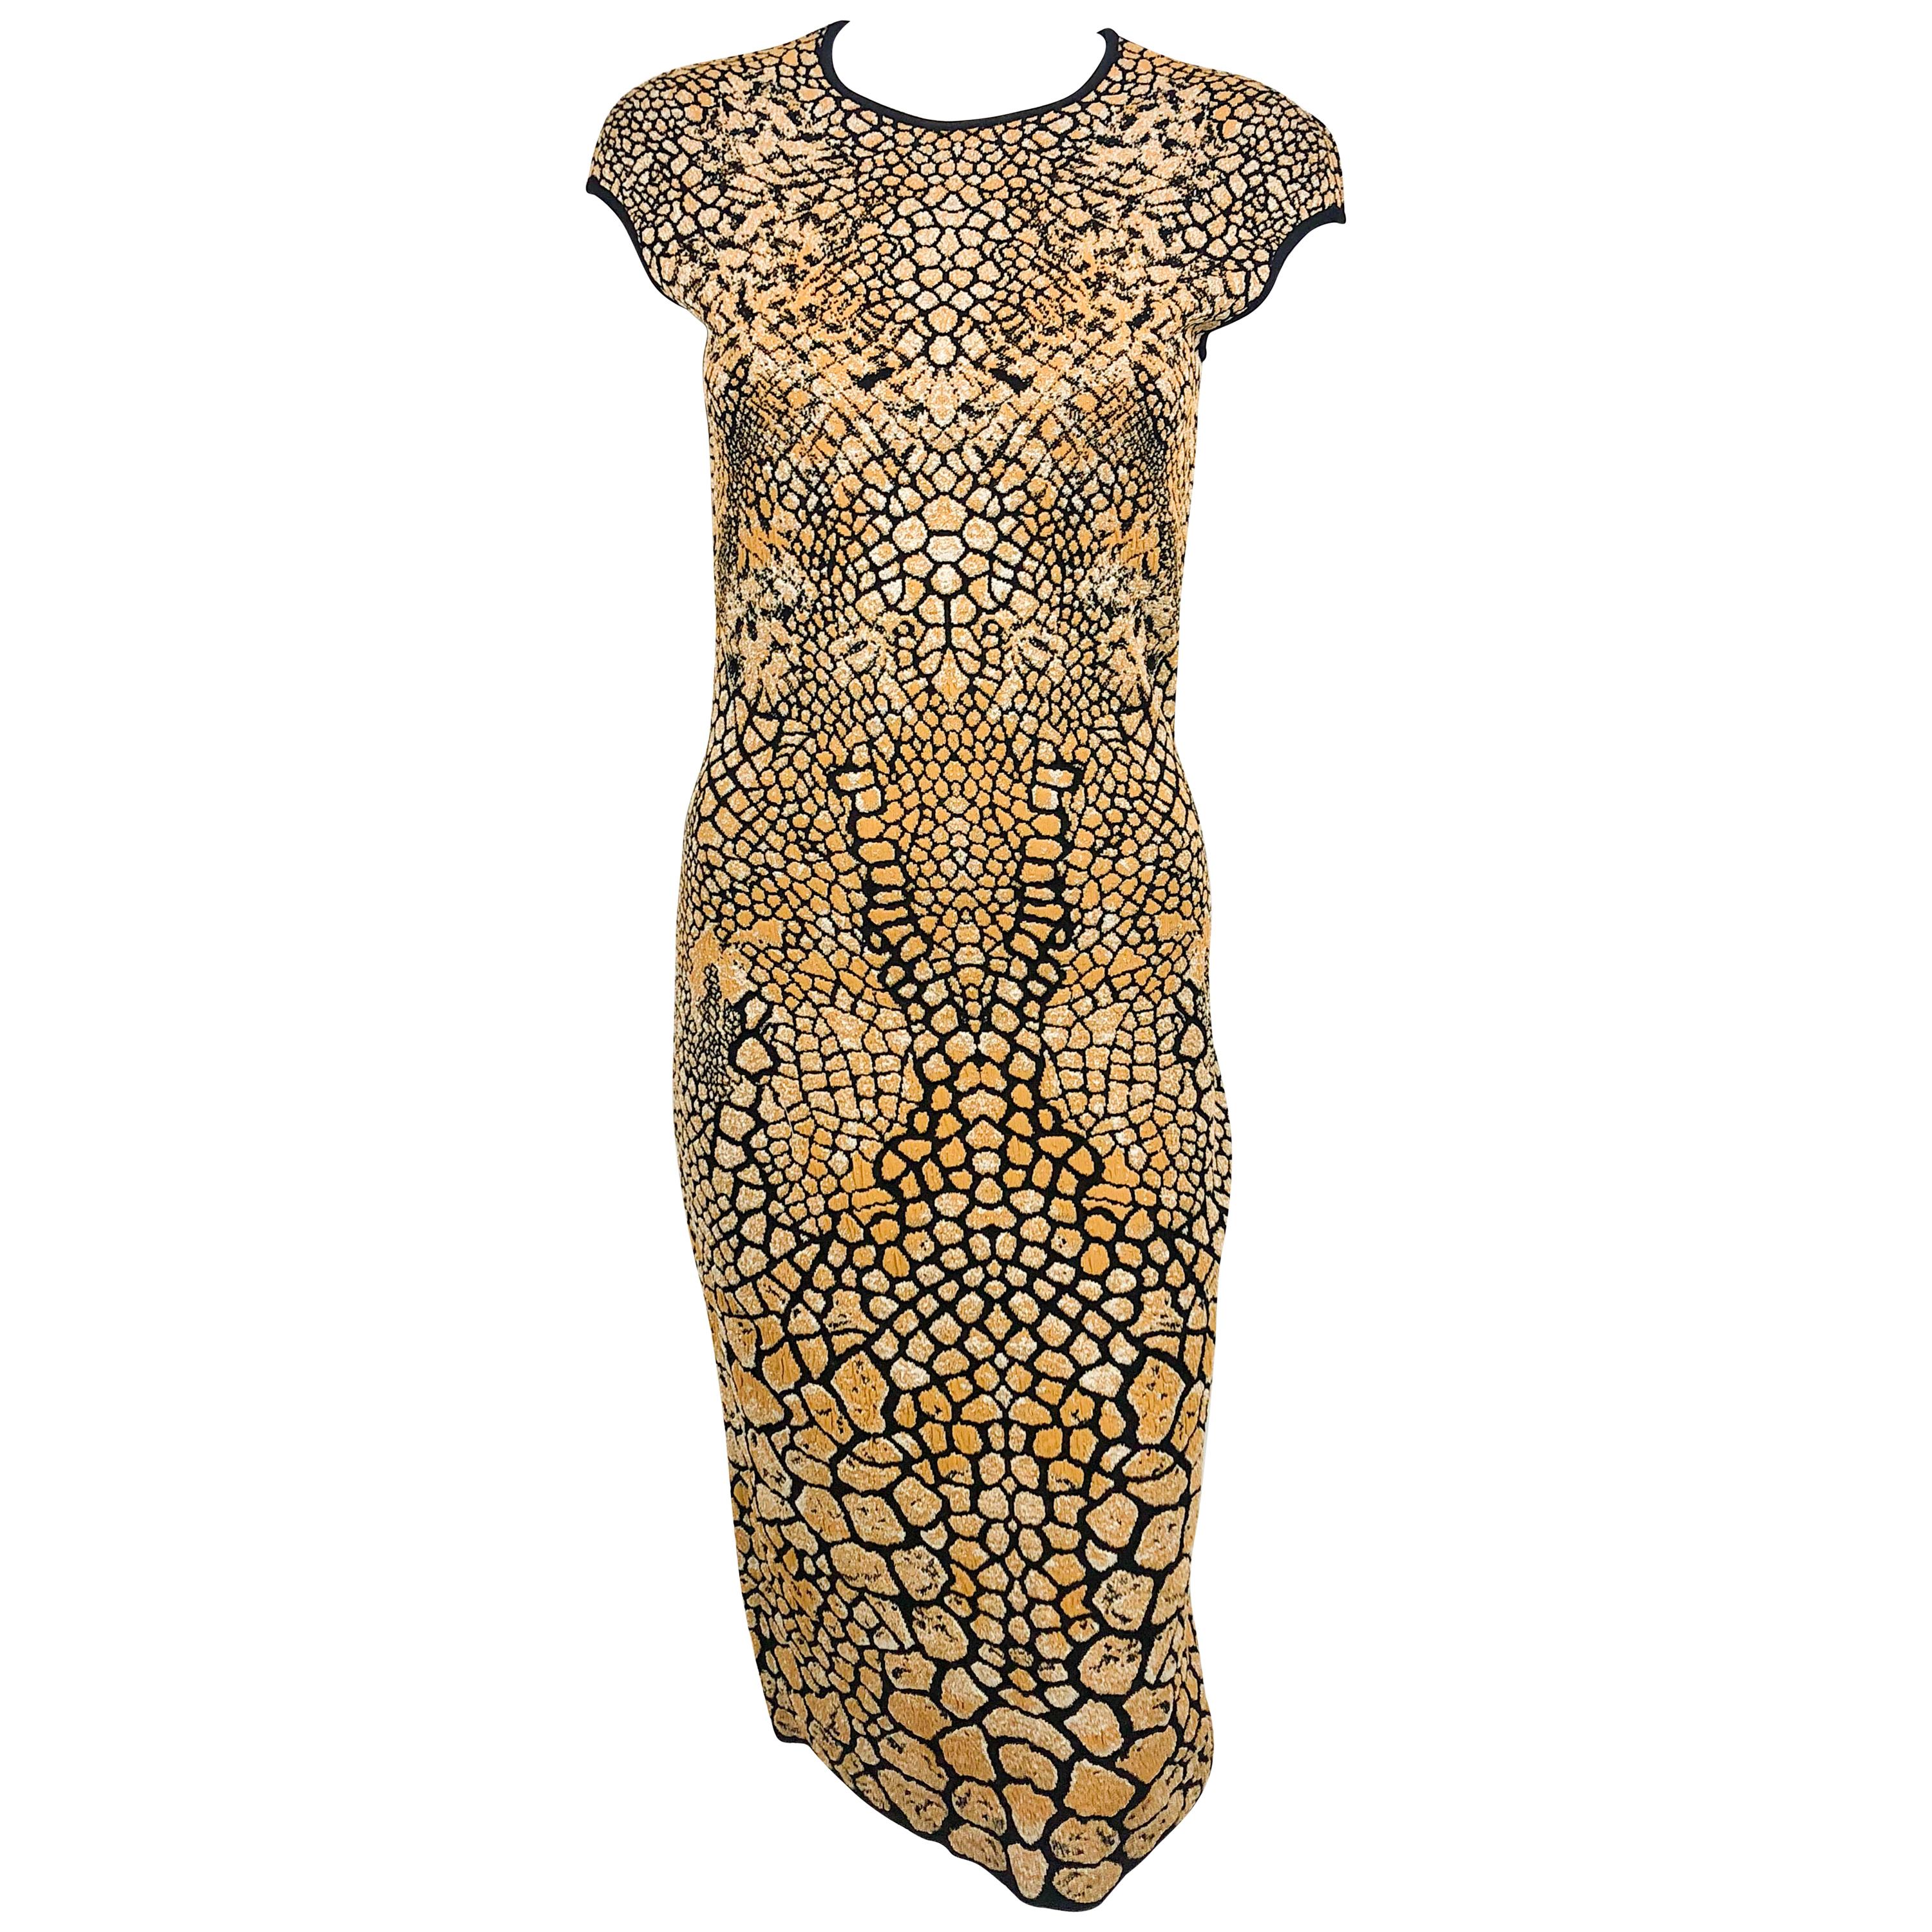 2009 Alexander McQueen Stretch Knit Golden and Black Dress For Sale